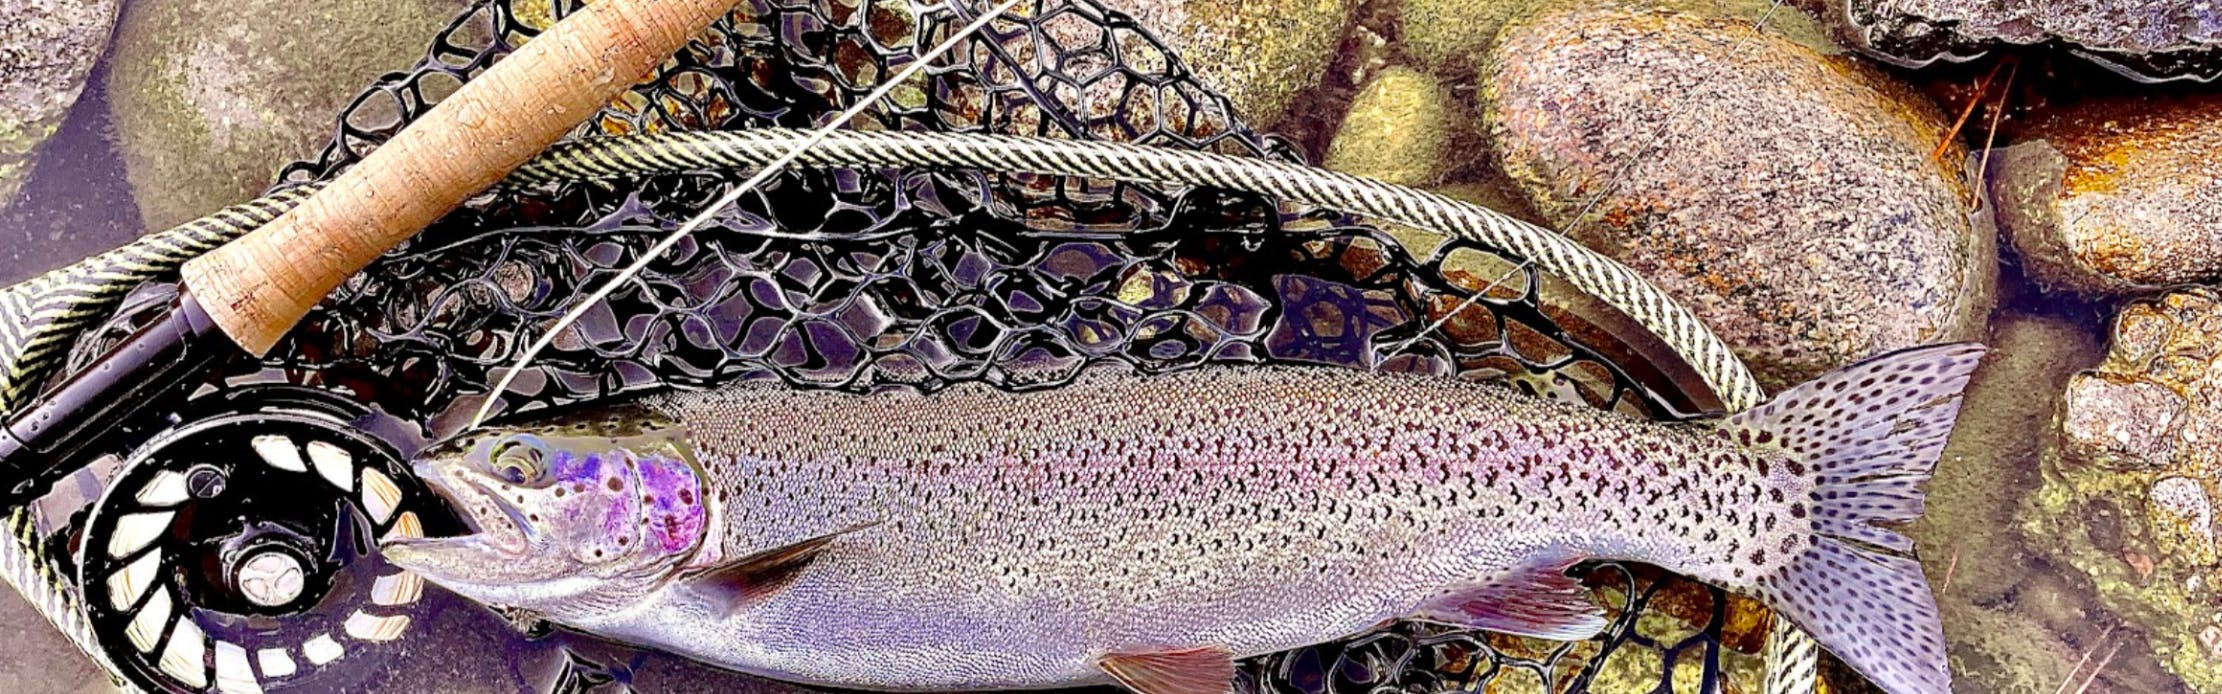 What Fly Fishing Gear Can You Save on, and What Should You Splurge on?